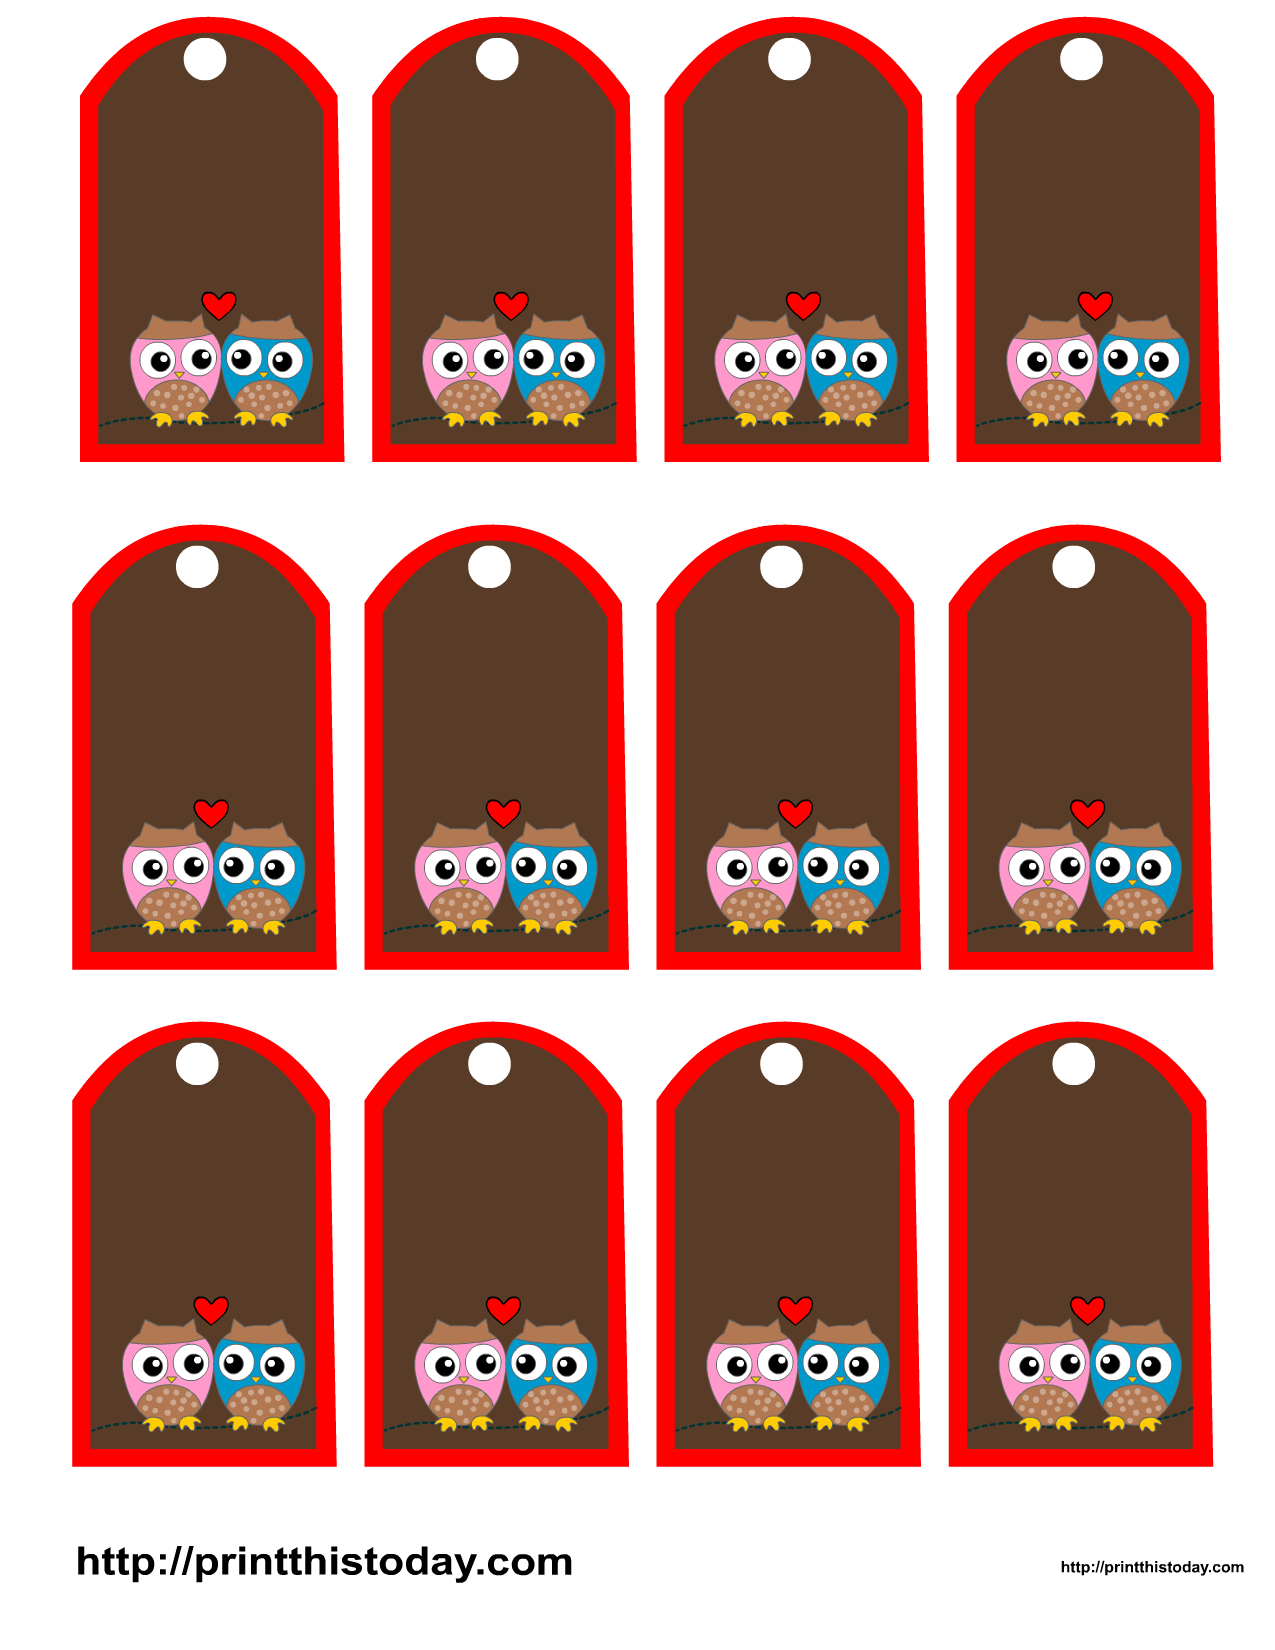 Favor tags with owls and heart